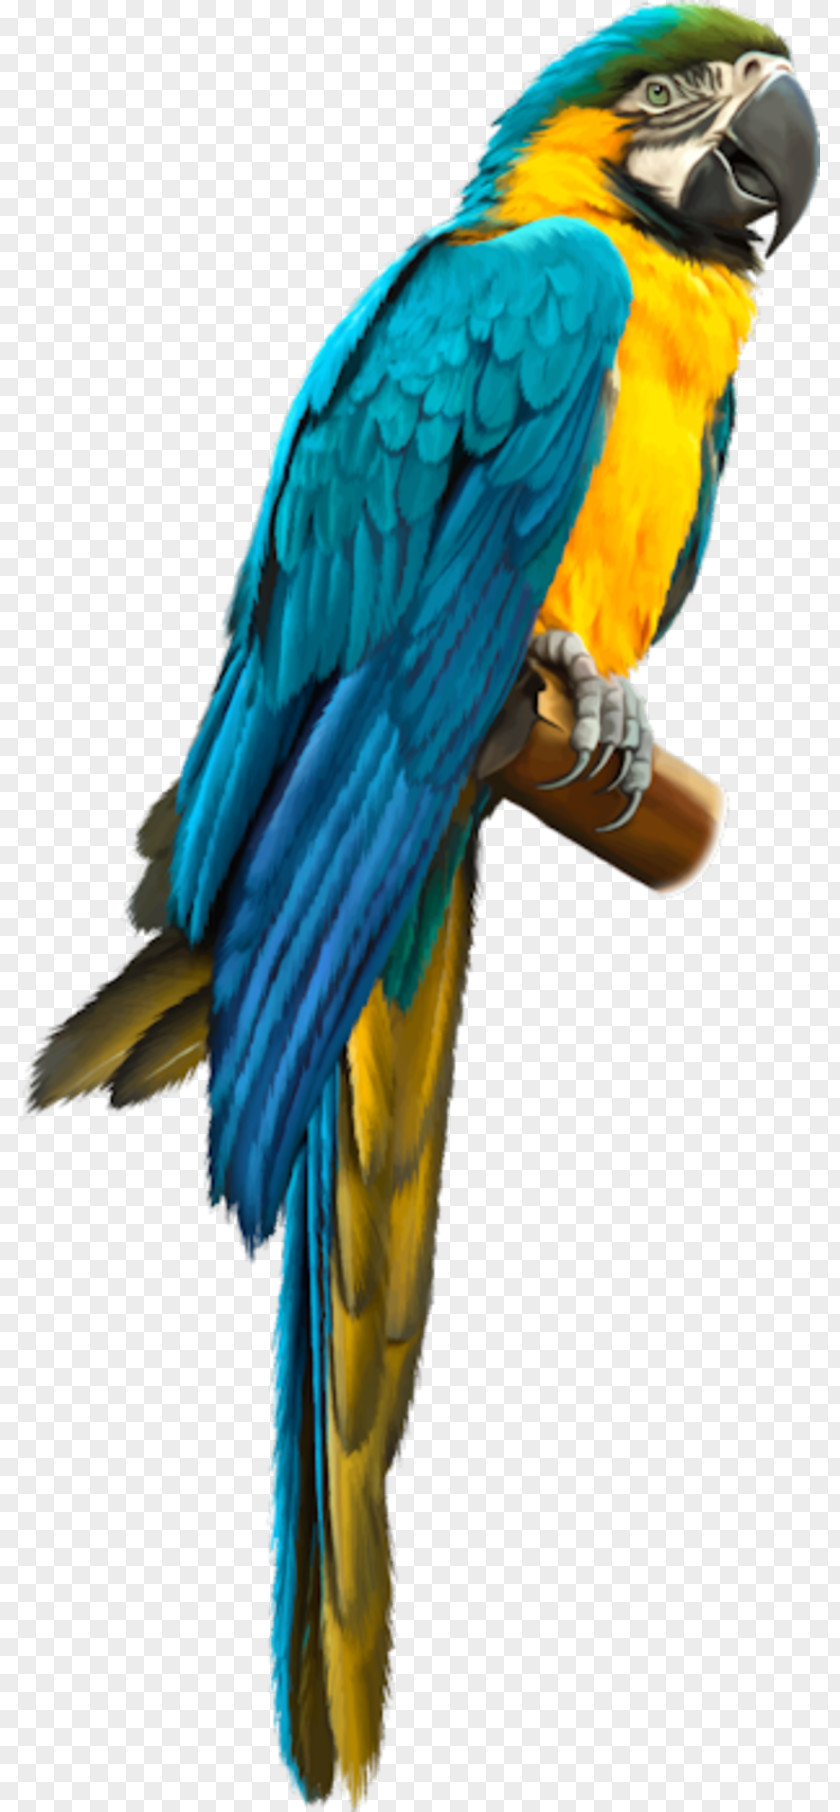 Bird Blue-and-yellow Macaw Amazon Parrot Parrots PNG